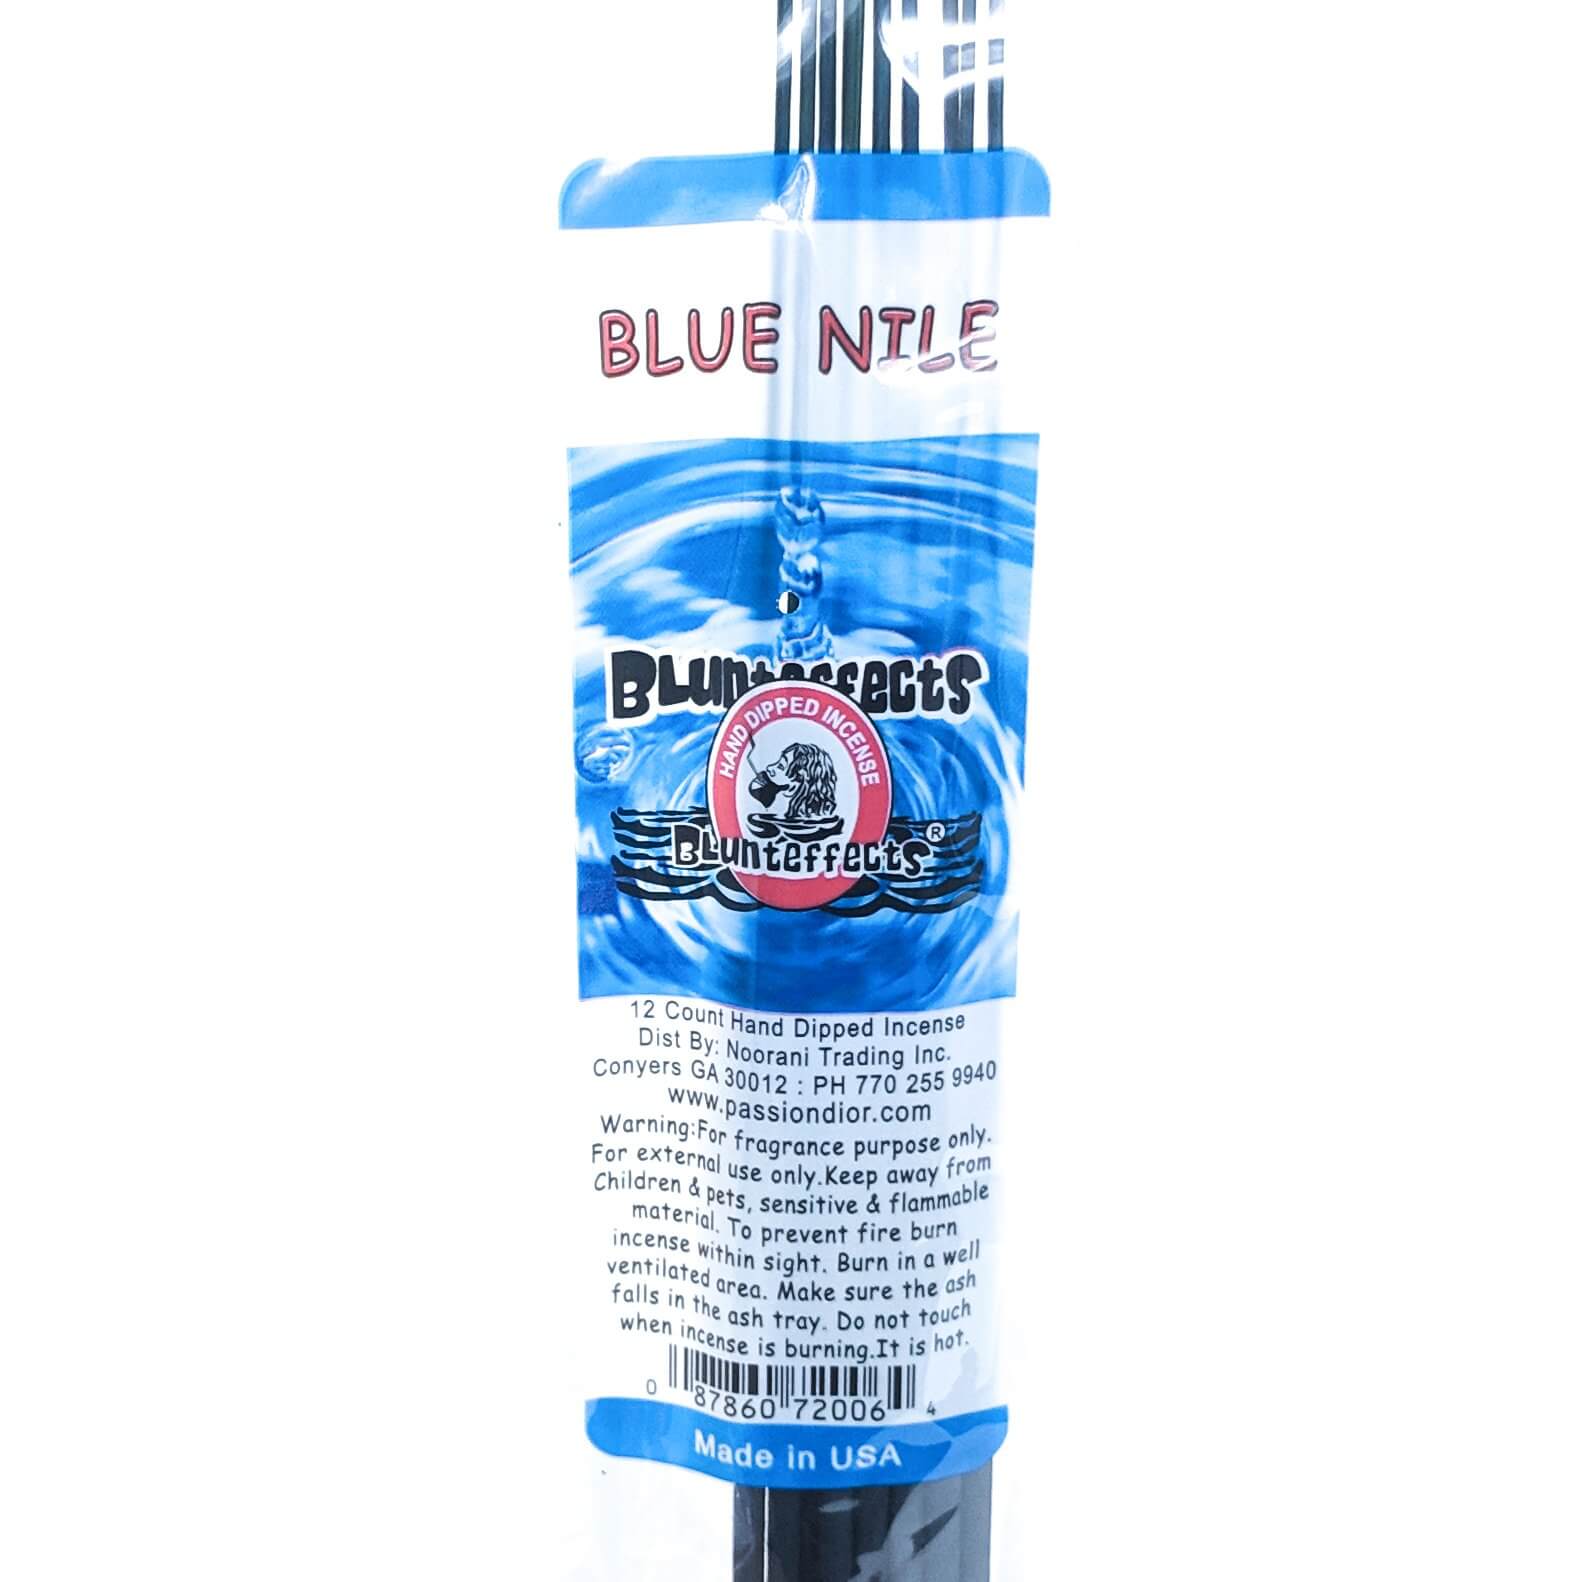 Blunteffects Incense Blue Nile